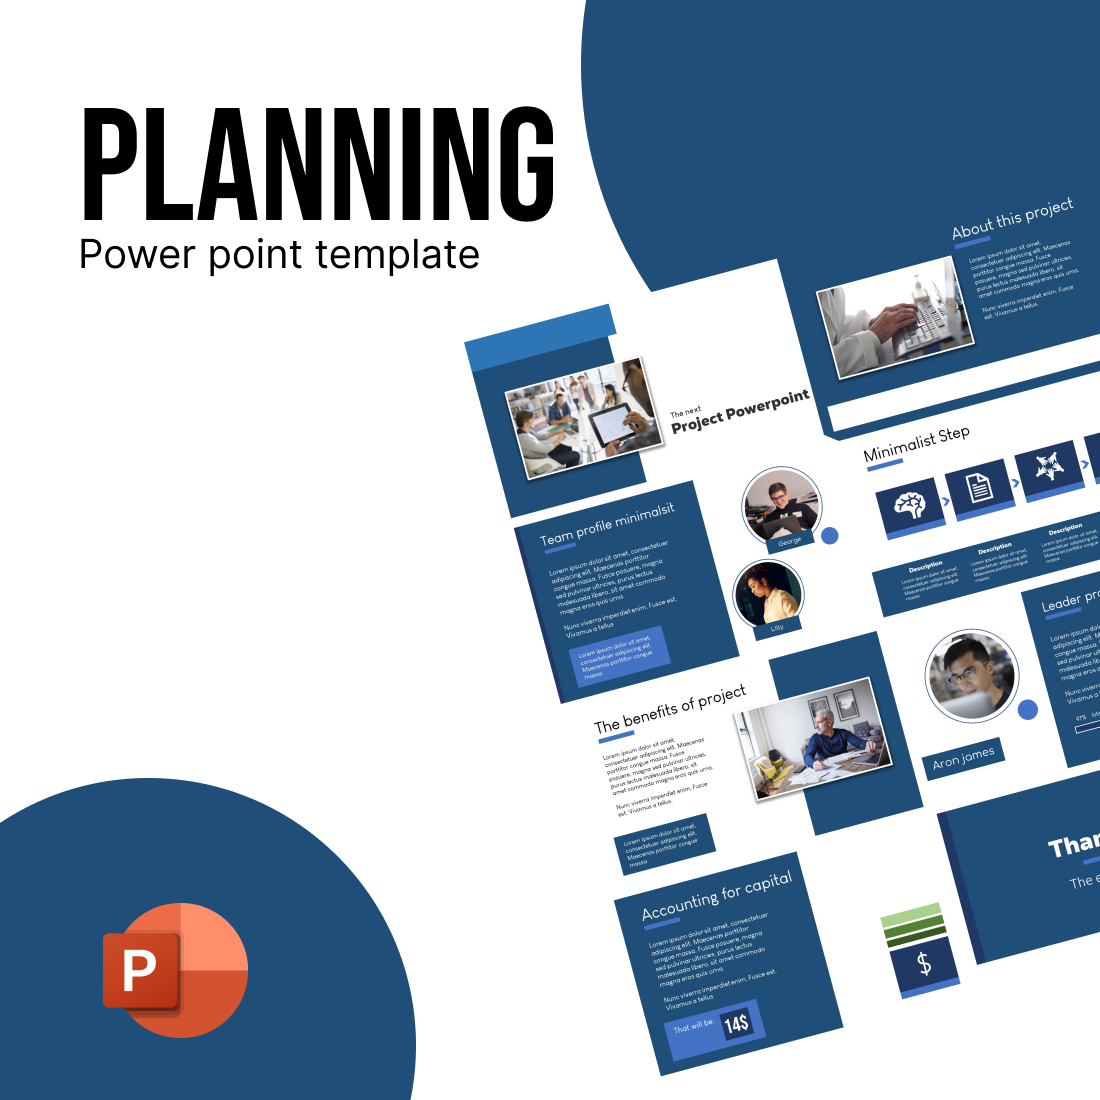 Planning Powerpoint template cover image.